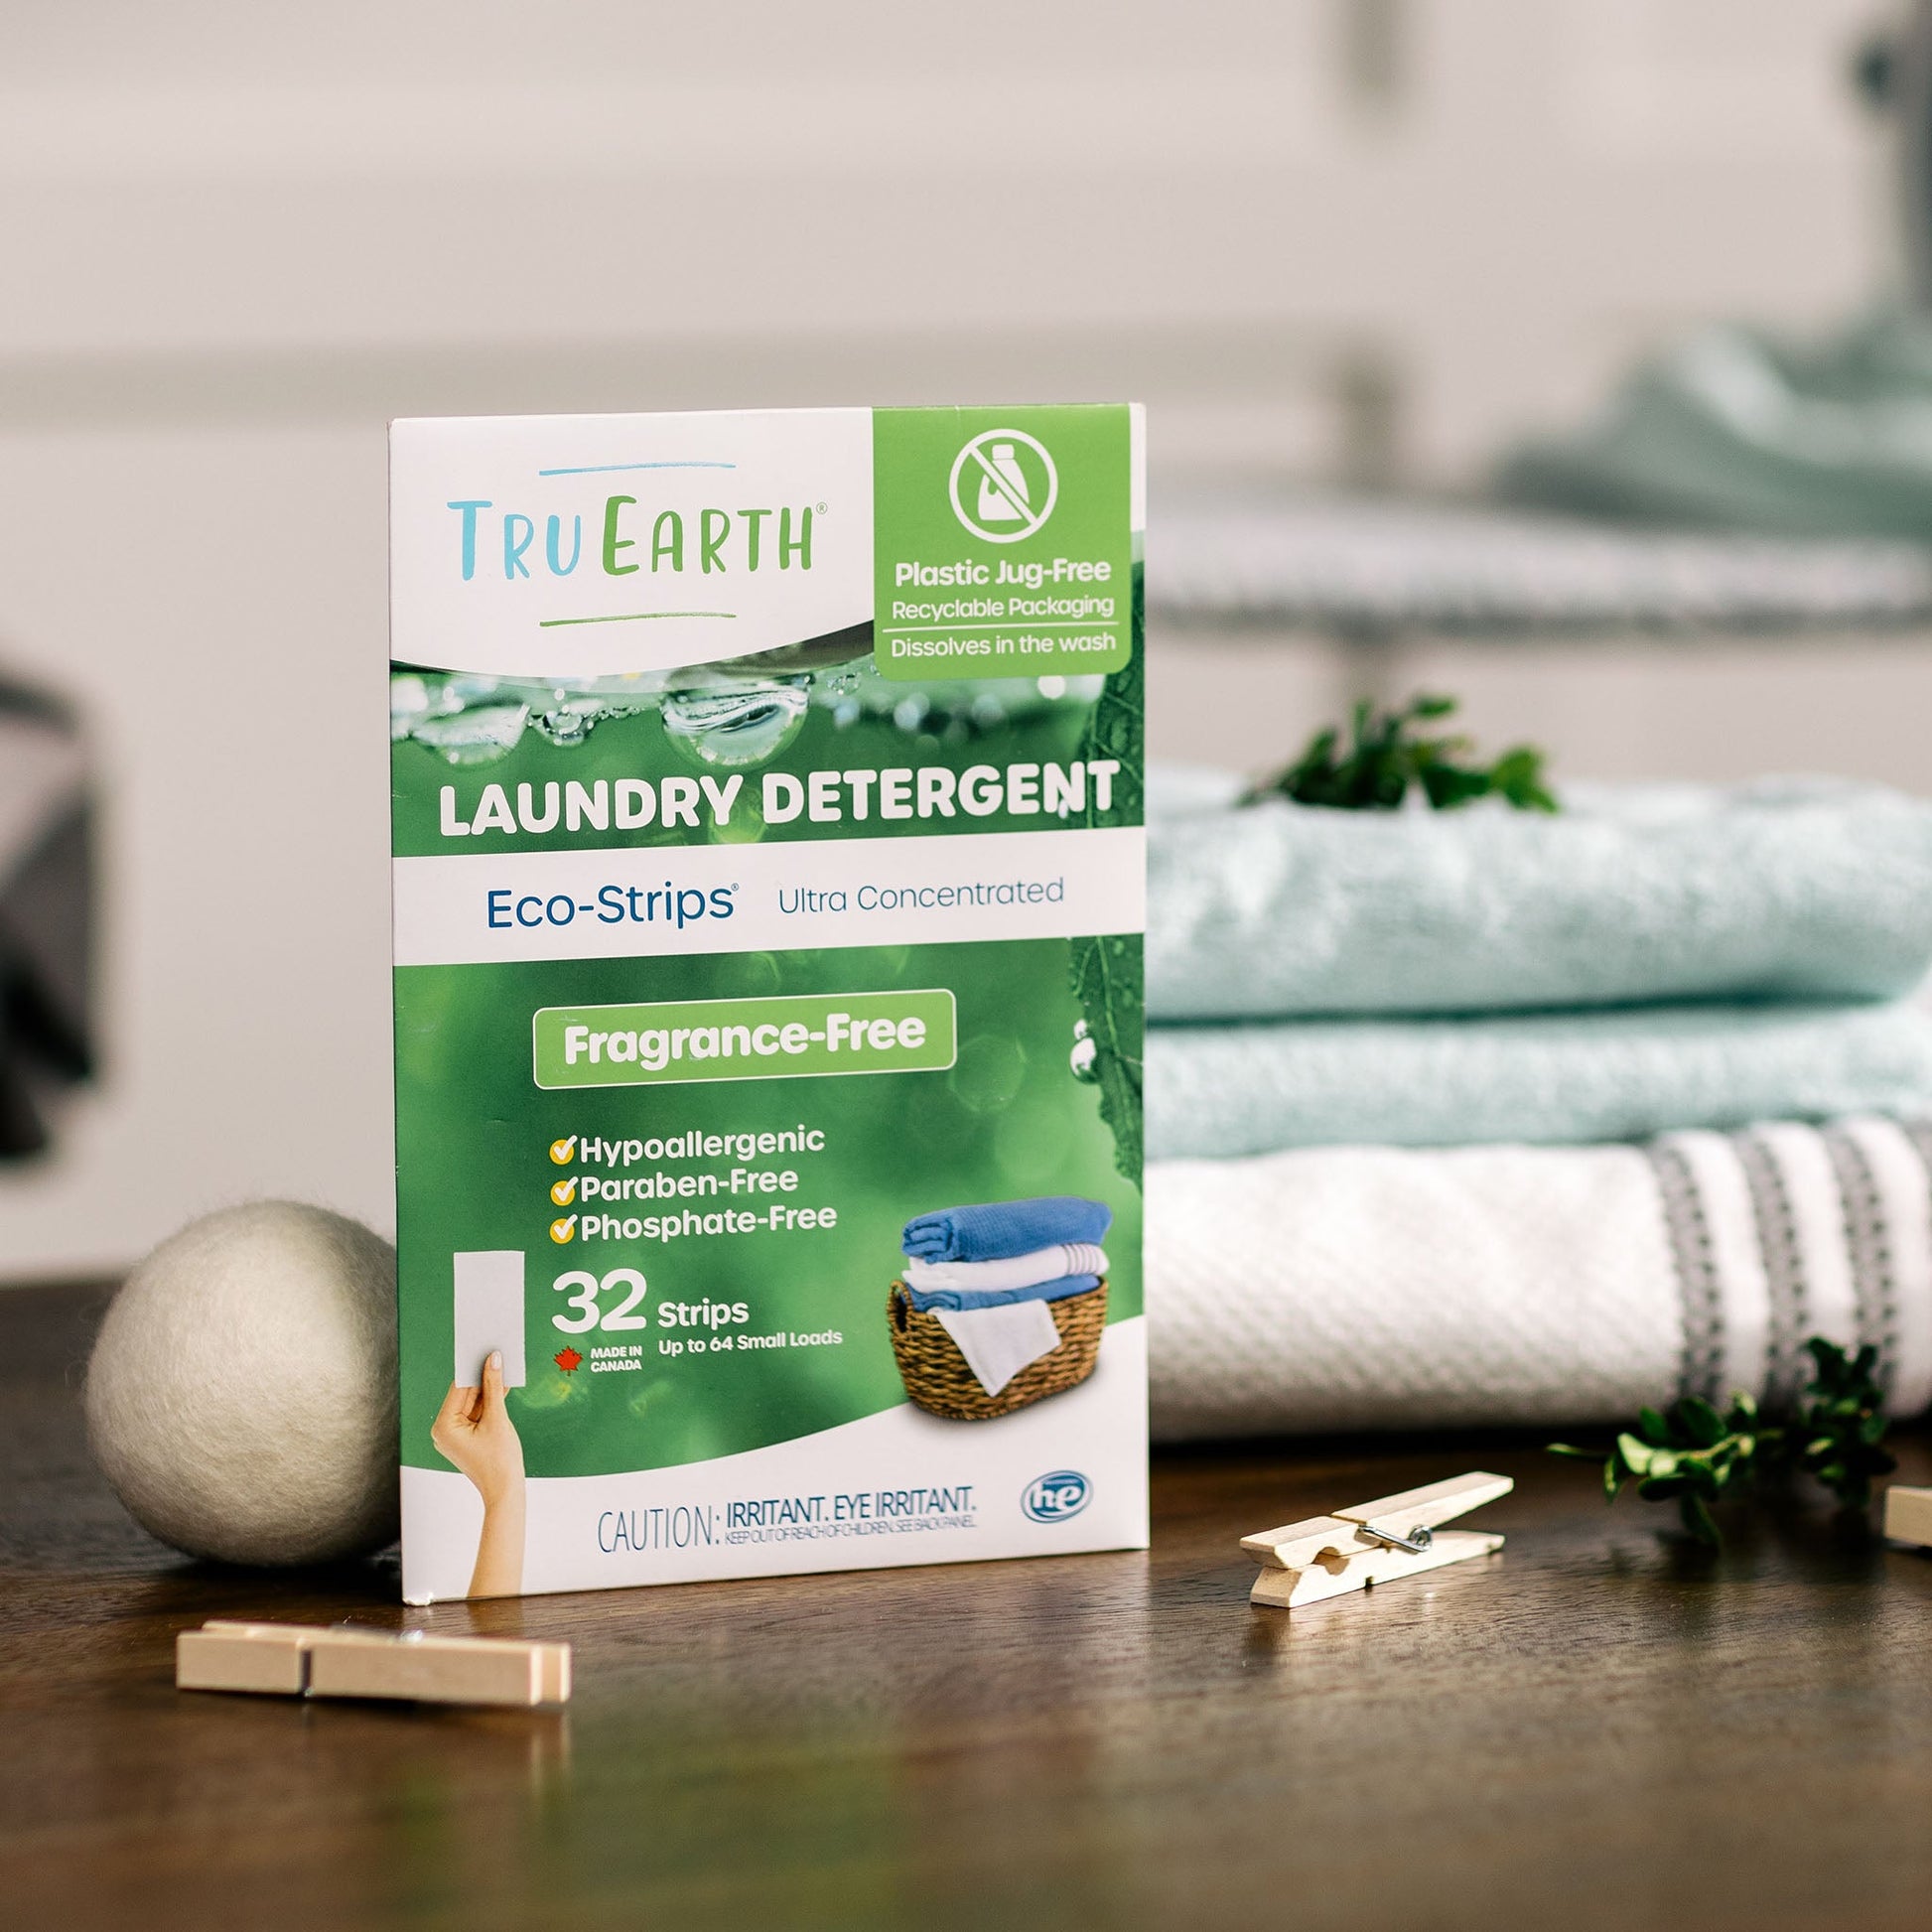 Tru Earth Eco-Strips Laundry Detergent - Fragrance-Free / 384 Strips